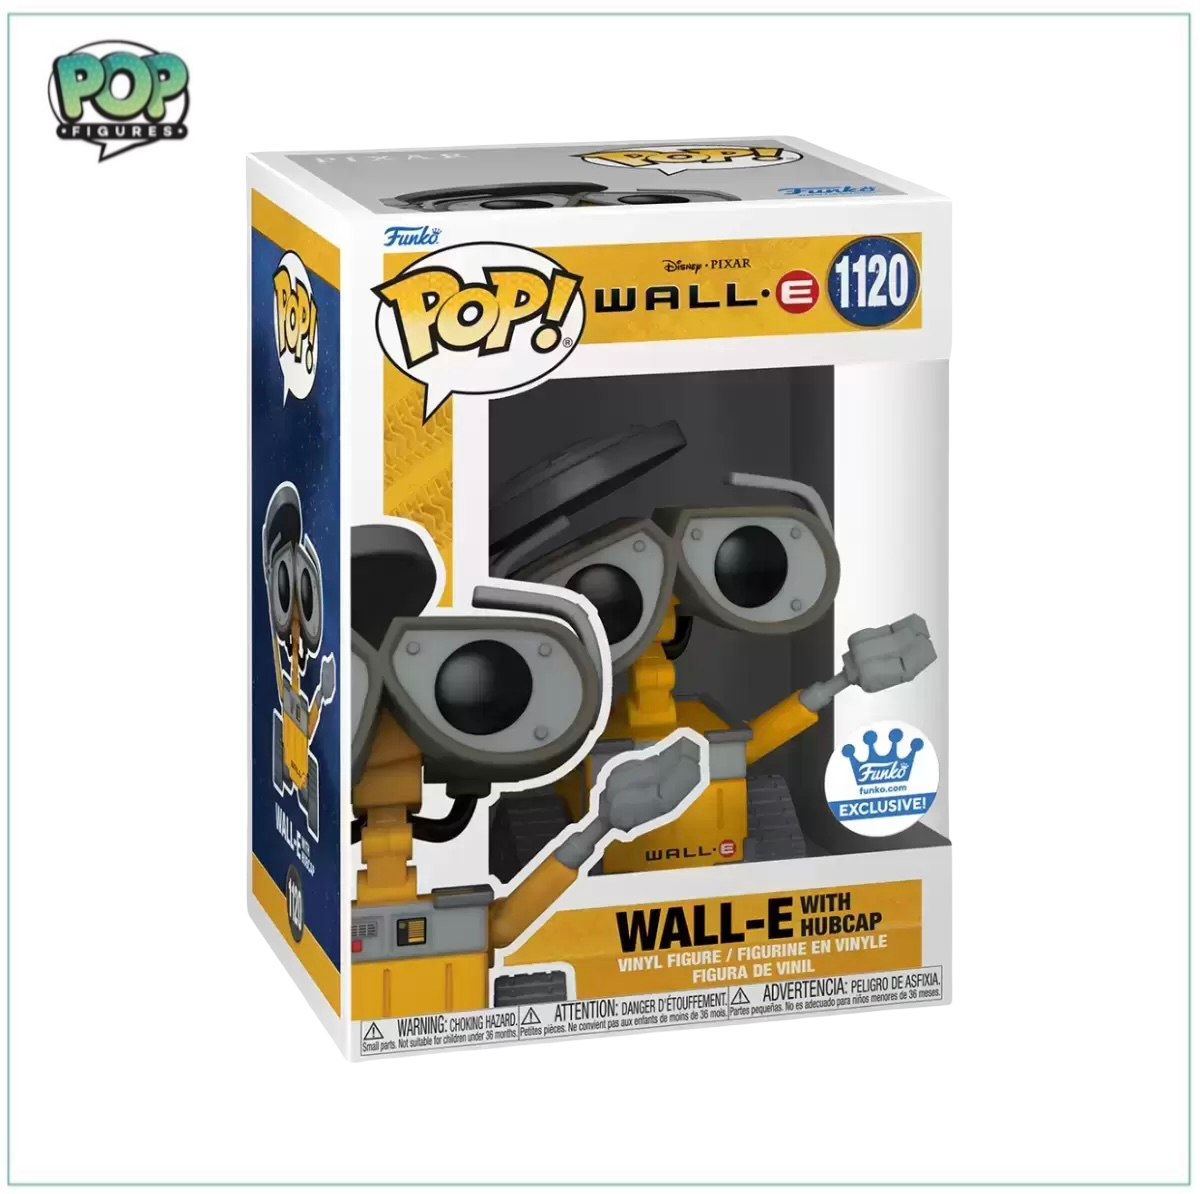 Wall-E with Hubcap #1120 Funko Pop! - Disney: Wall-E - Funko Shop Exclusive - Angry Cat